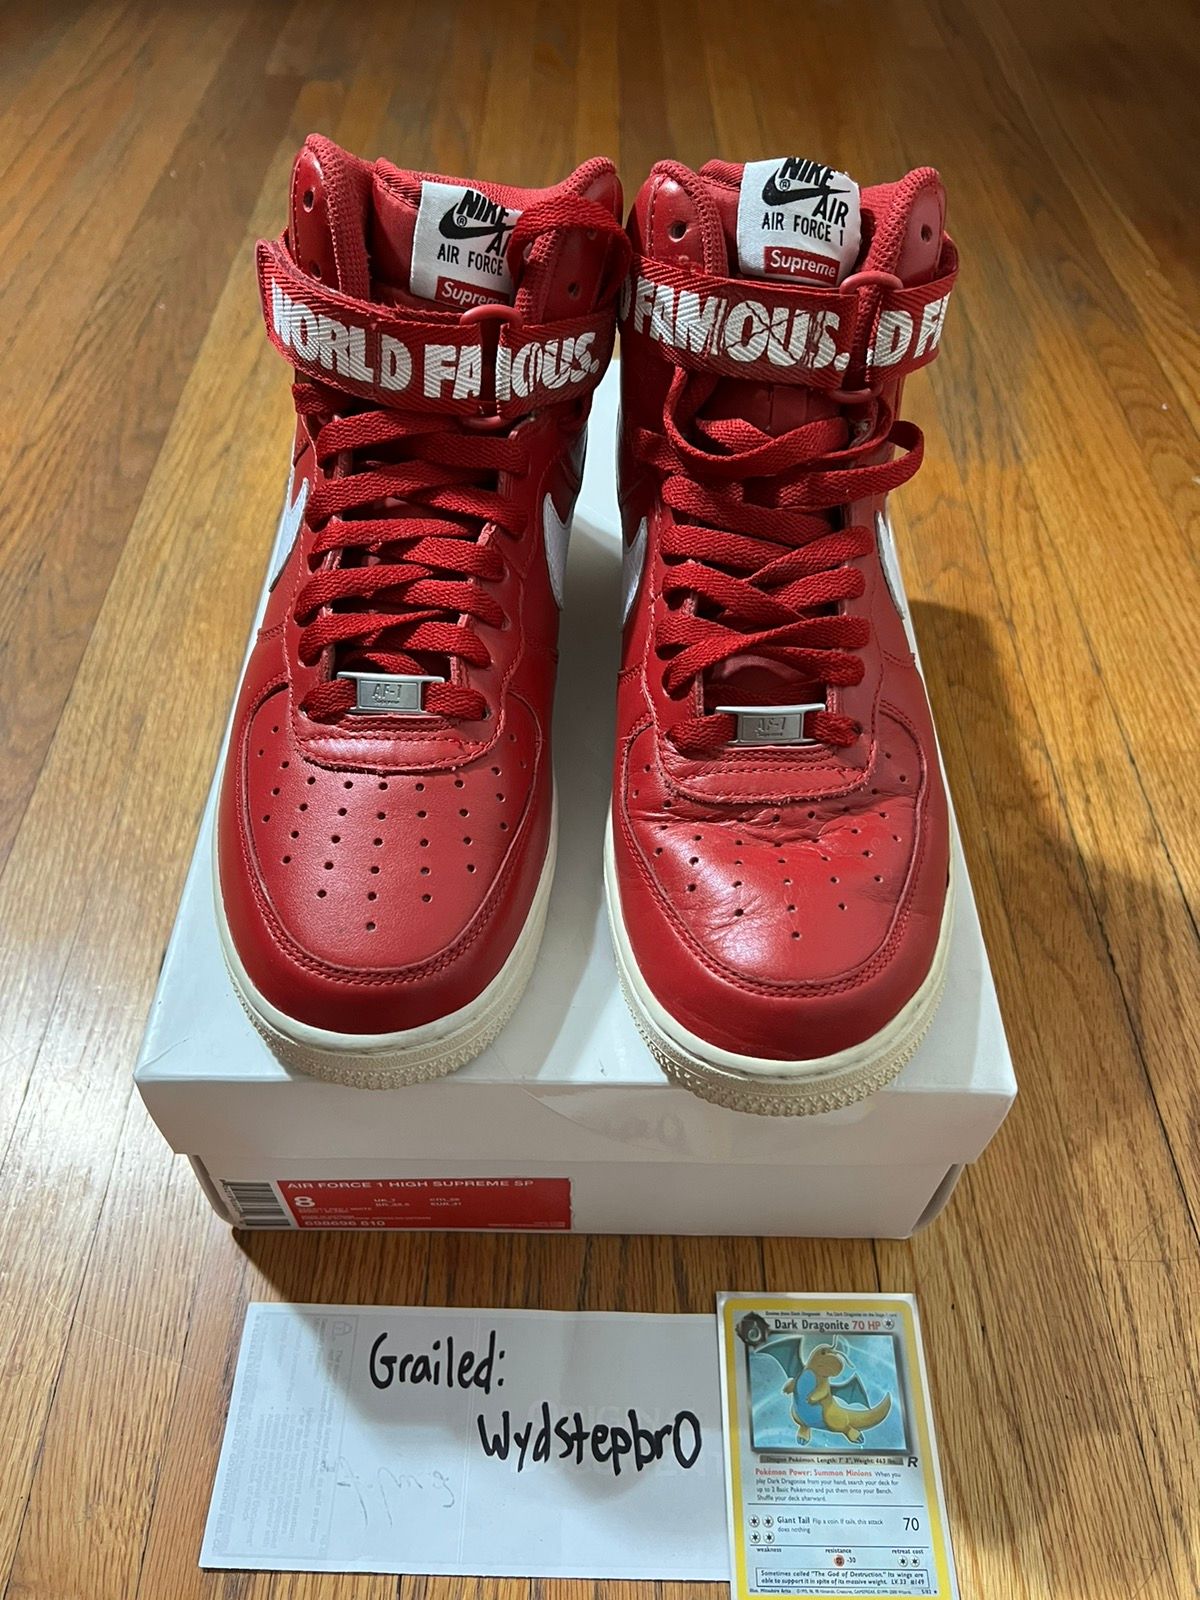 Nike Air Force 1 High SP 2014 Supreme Red 698696-610 Size US 9